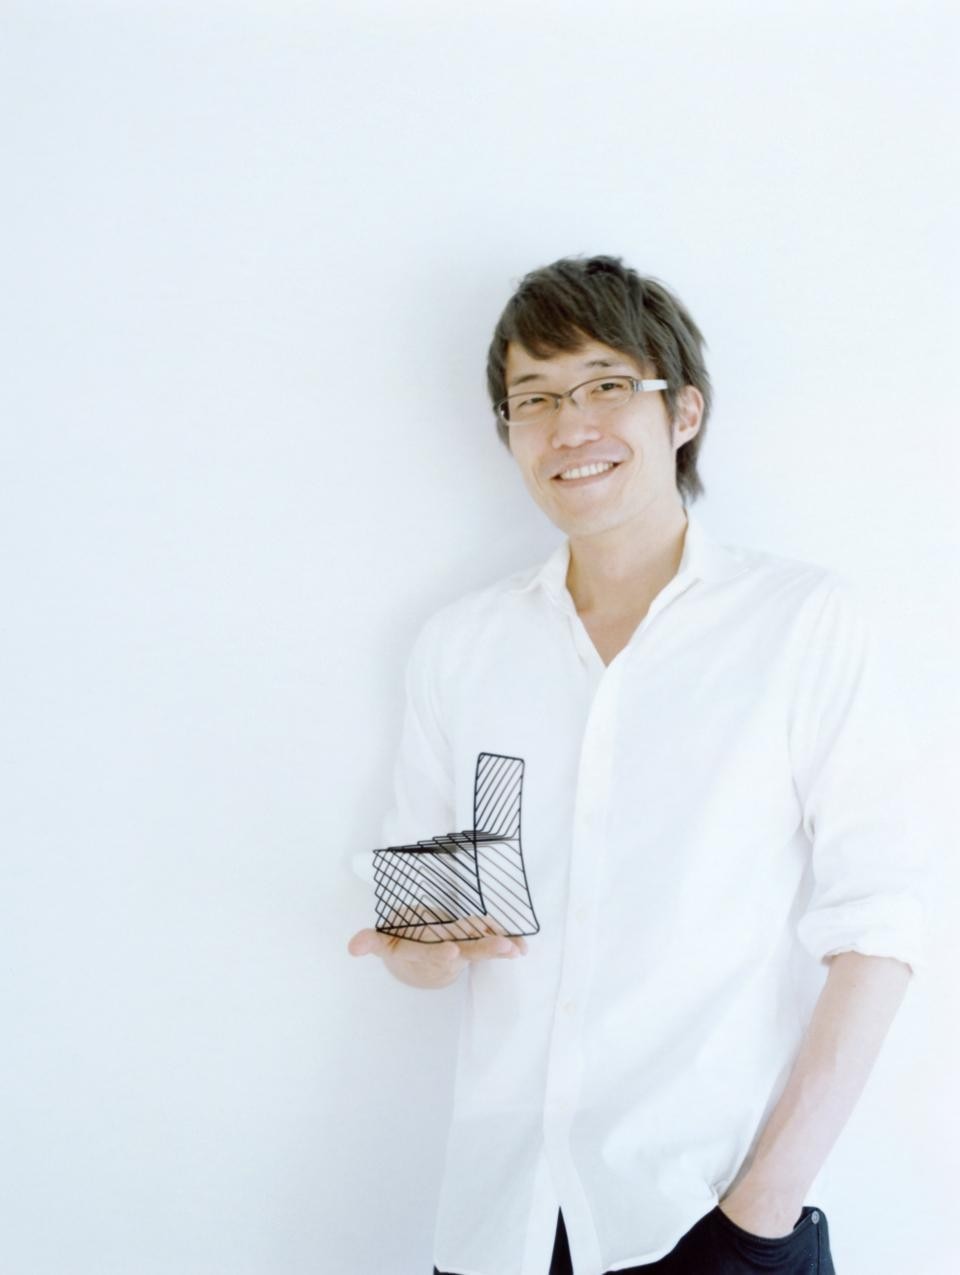 Oki Sato, Nendo co-founder with Akihiro Ito, holding a miniature of the <em>Thin Black Lines</em> collection chair